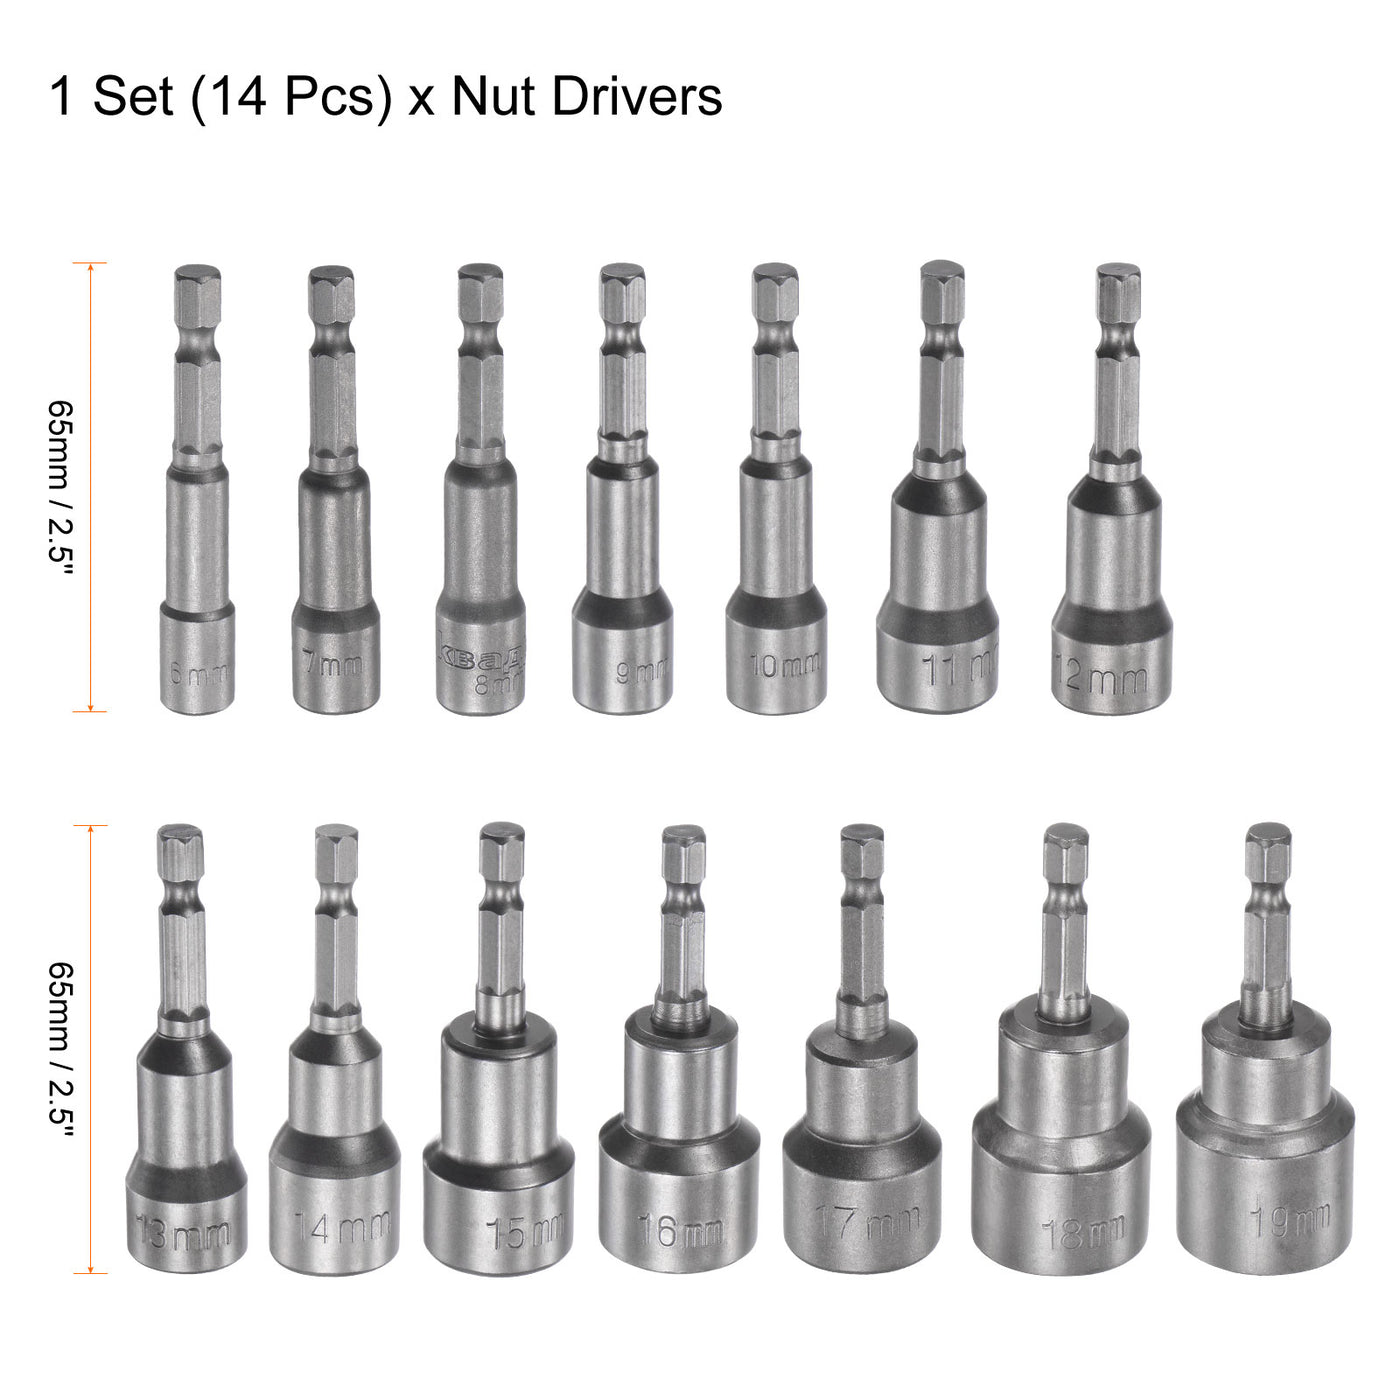 uxcell Uxcell 1/4" Quick-Change Hex Shank 6-19mm Magnetic Nut Driver Bit Set of 14 Piece, CR-V